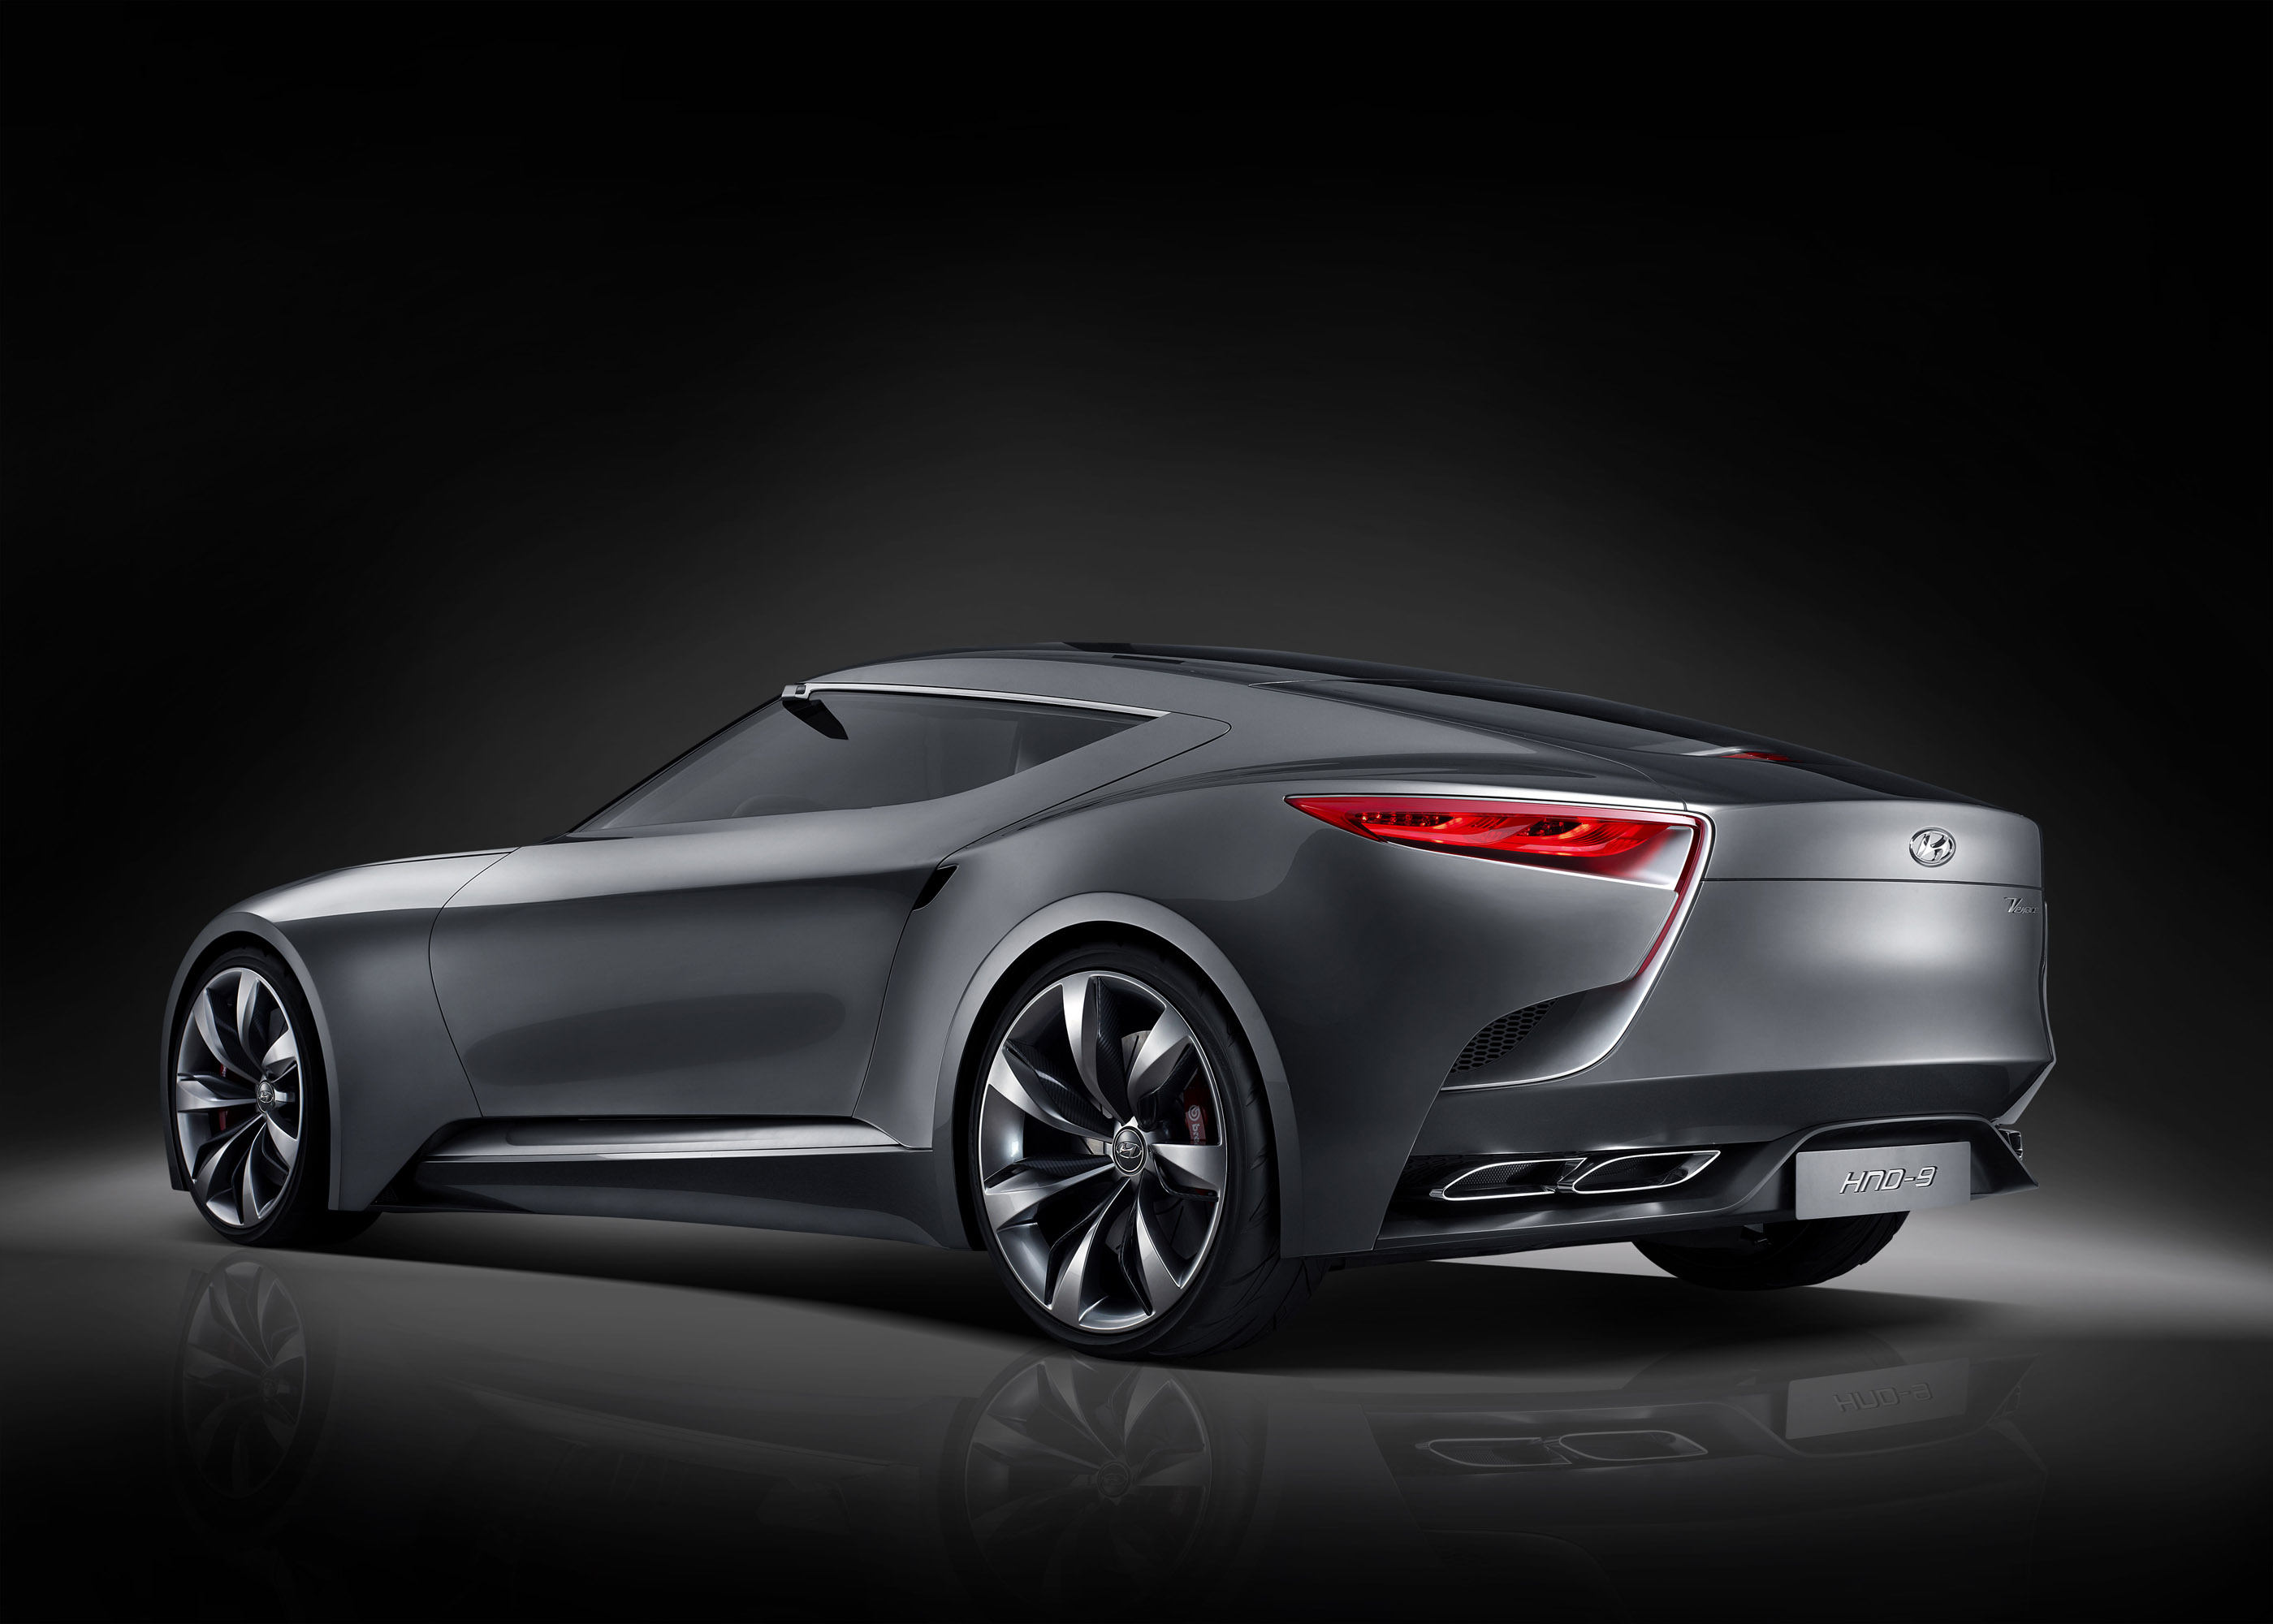 2013, Hyundai, Luxury, Sports, Coupe, Hnd 9, Concept Wallpaper